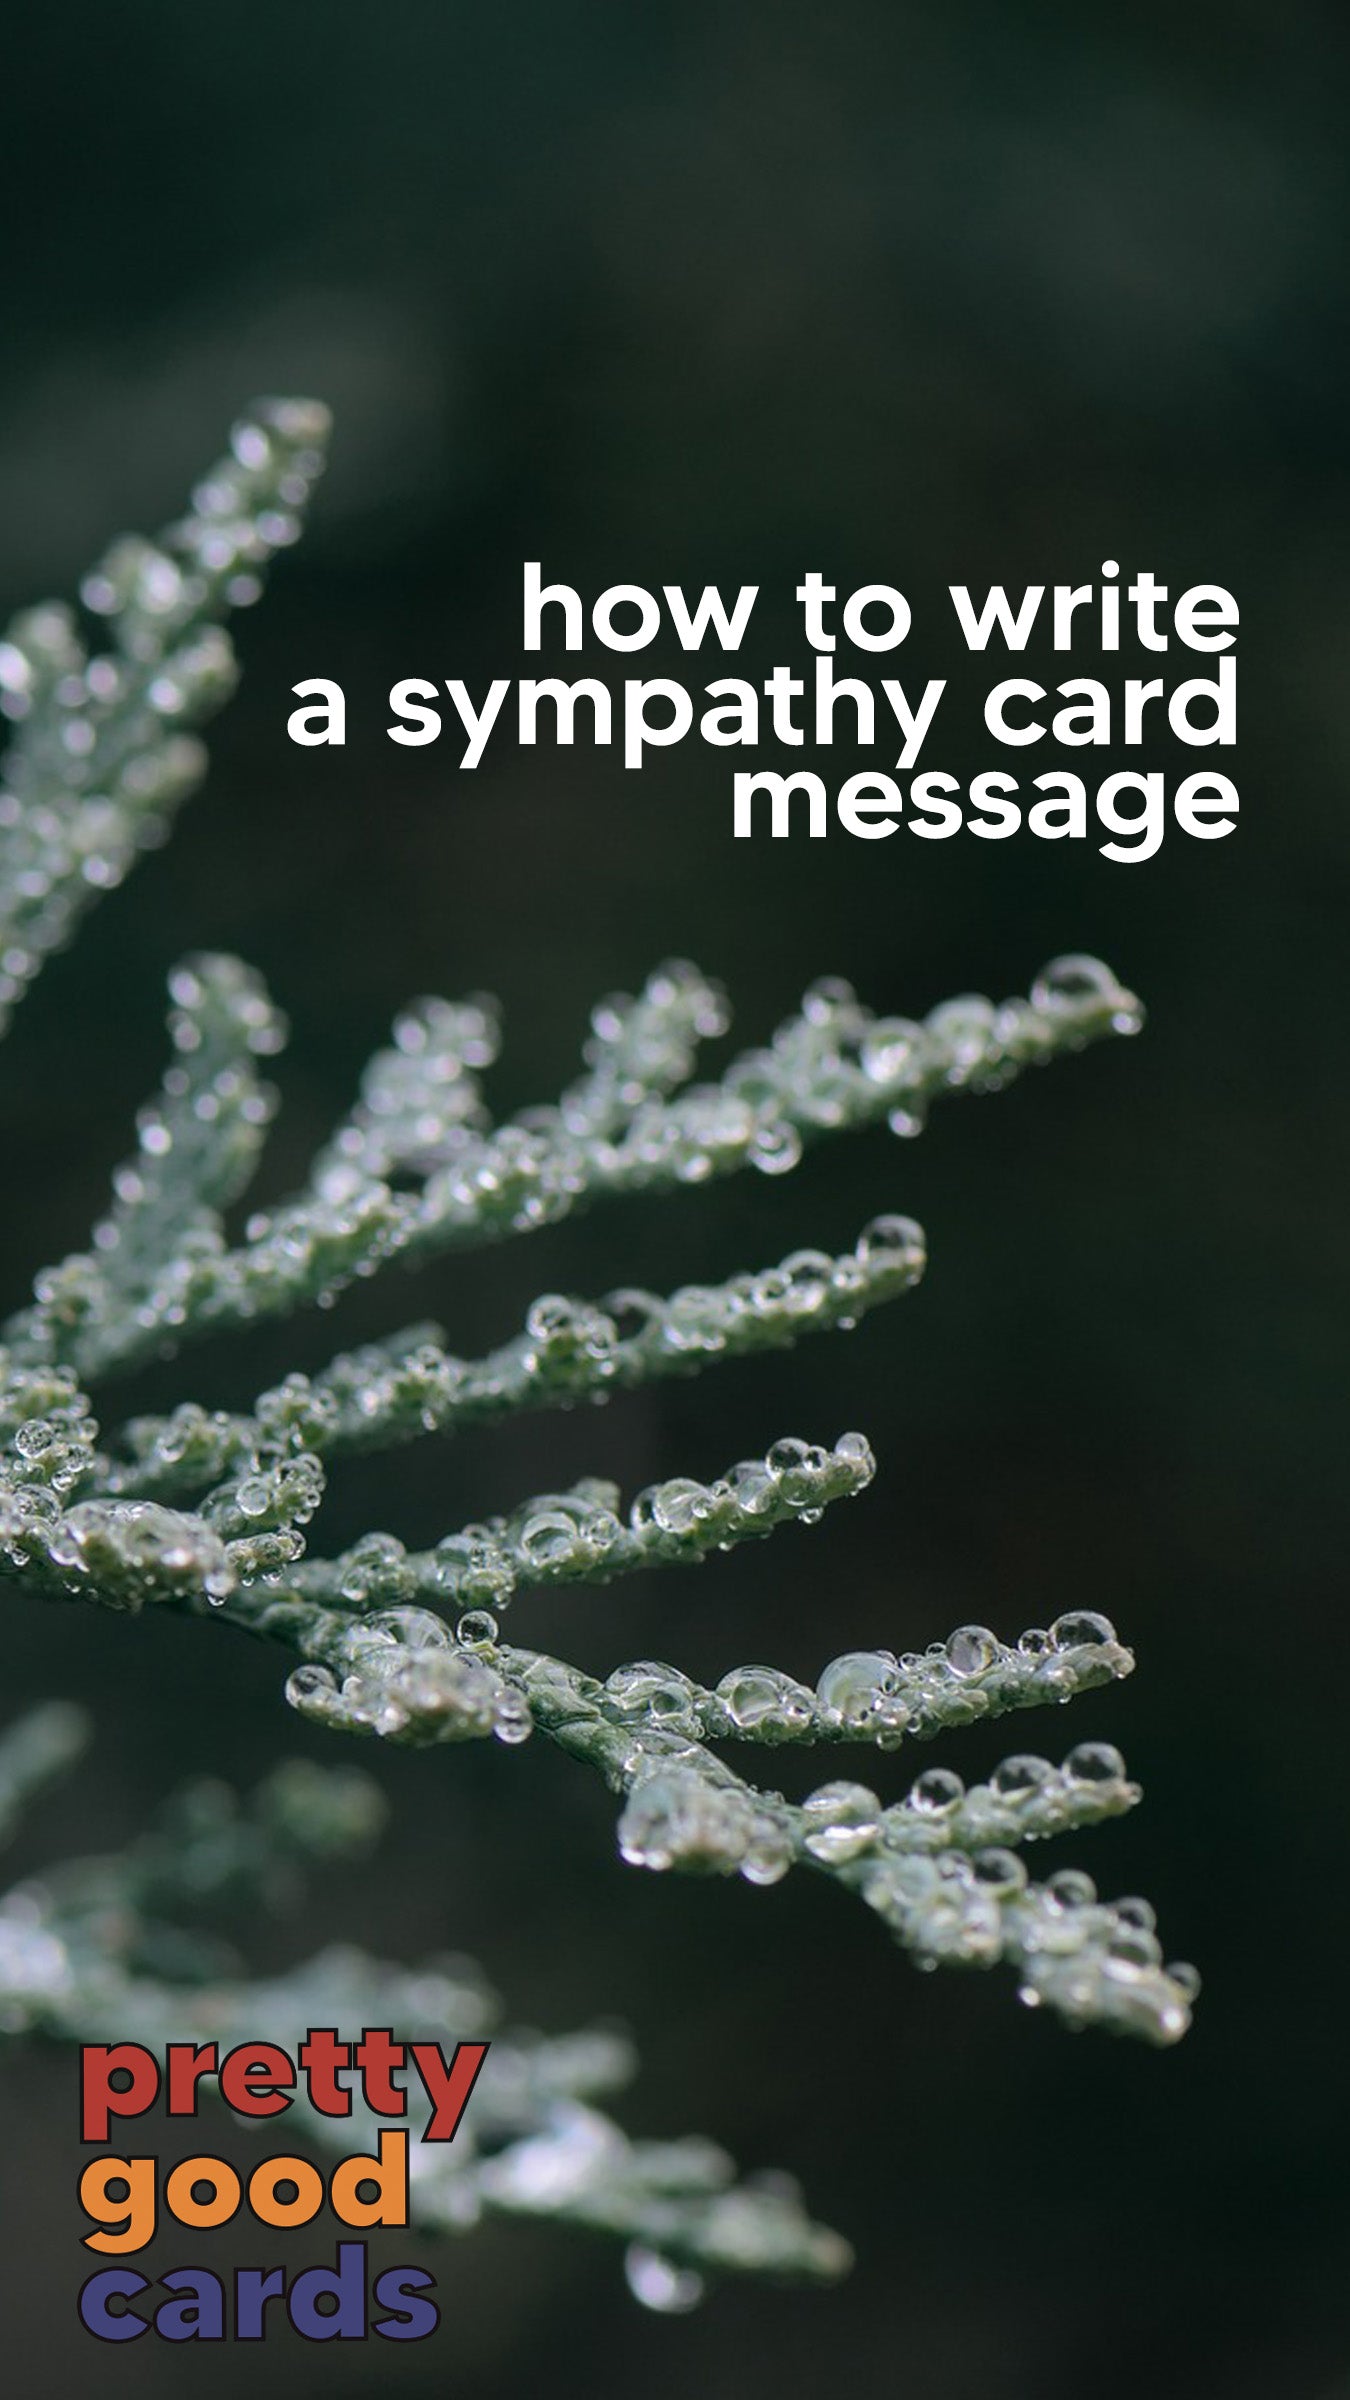 How To Write a Sympathy Card Message